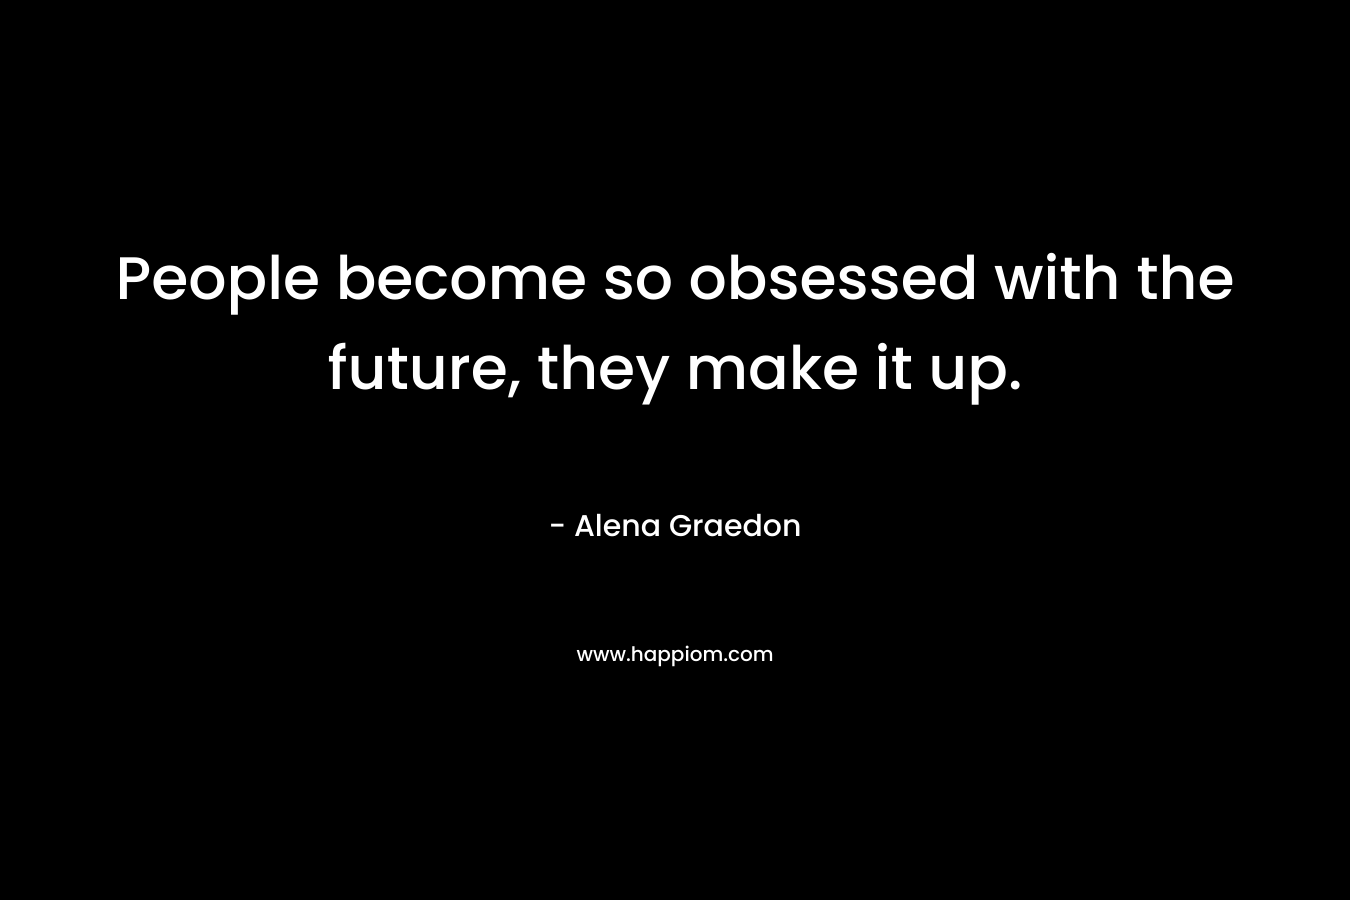 People become so obsessed with the future, they make it up.